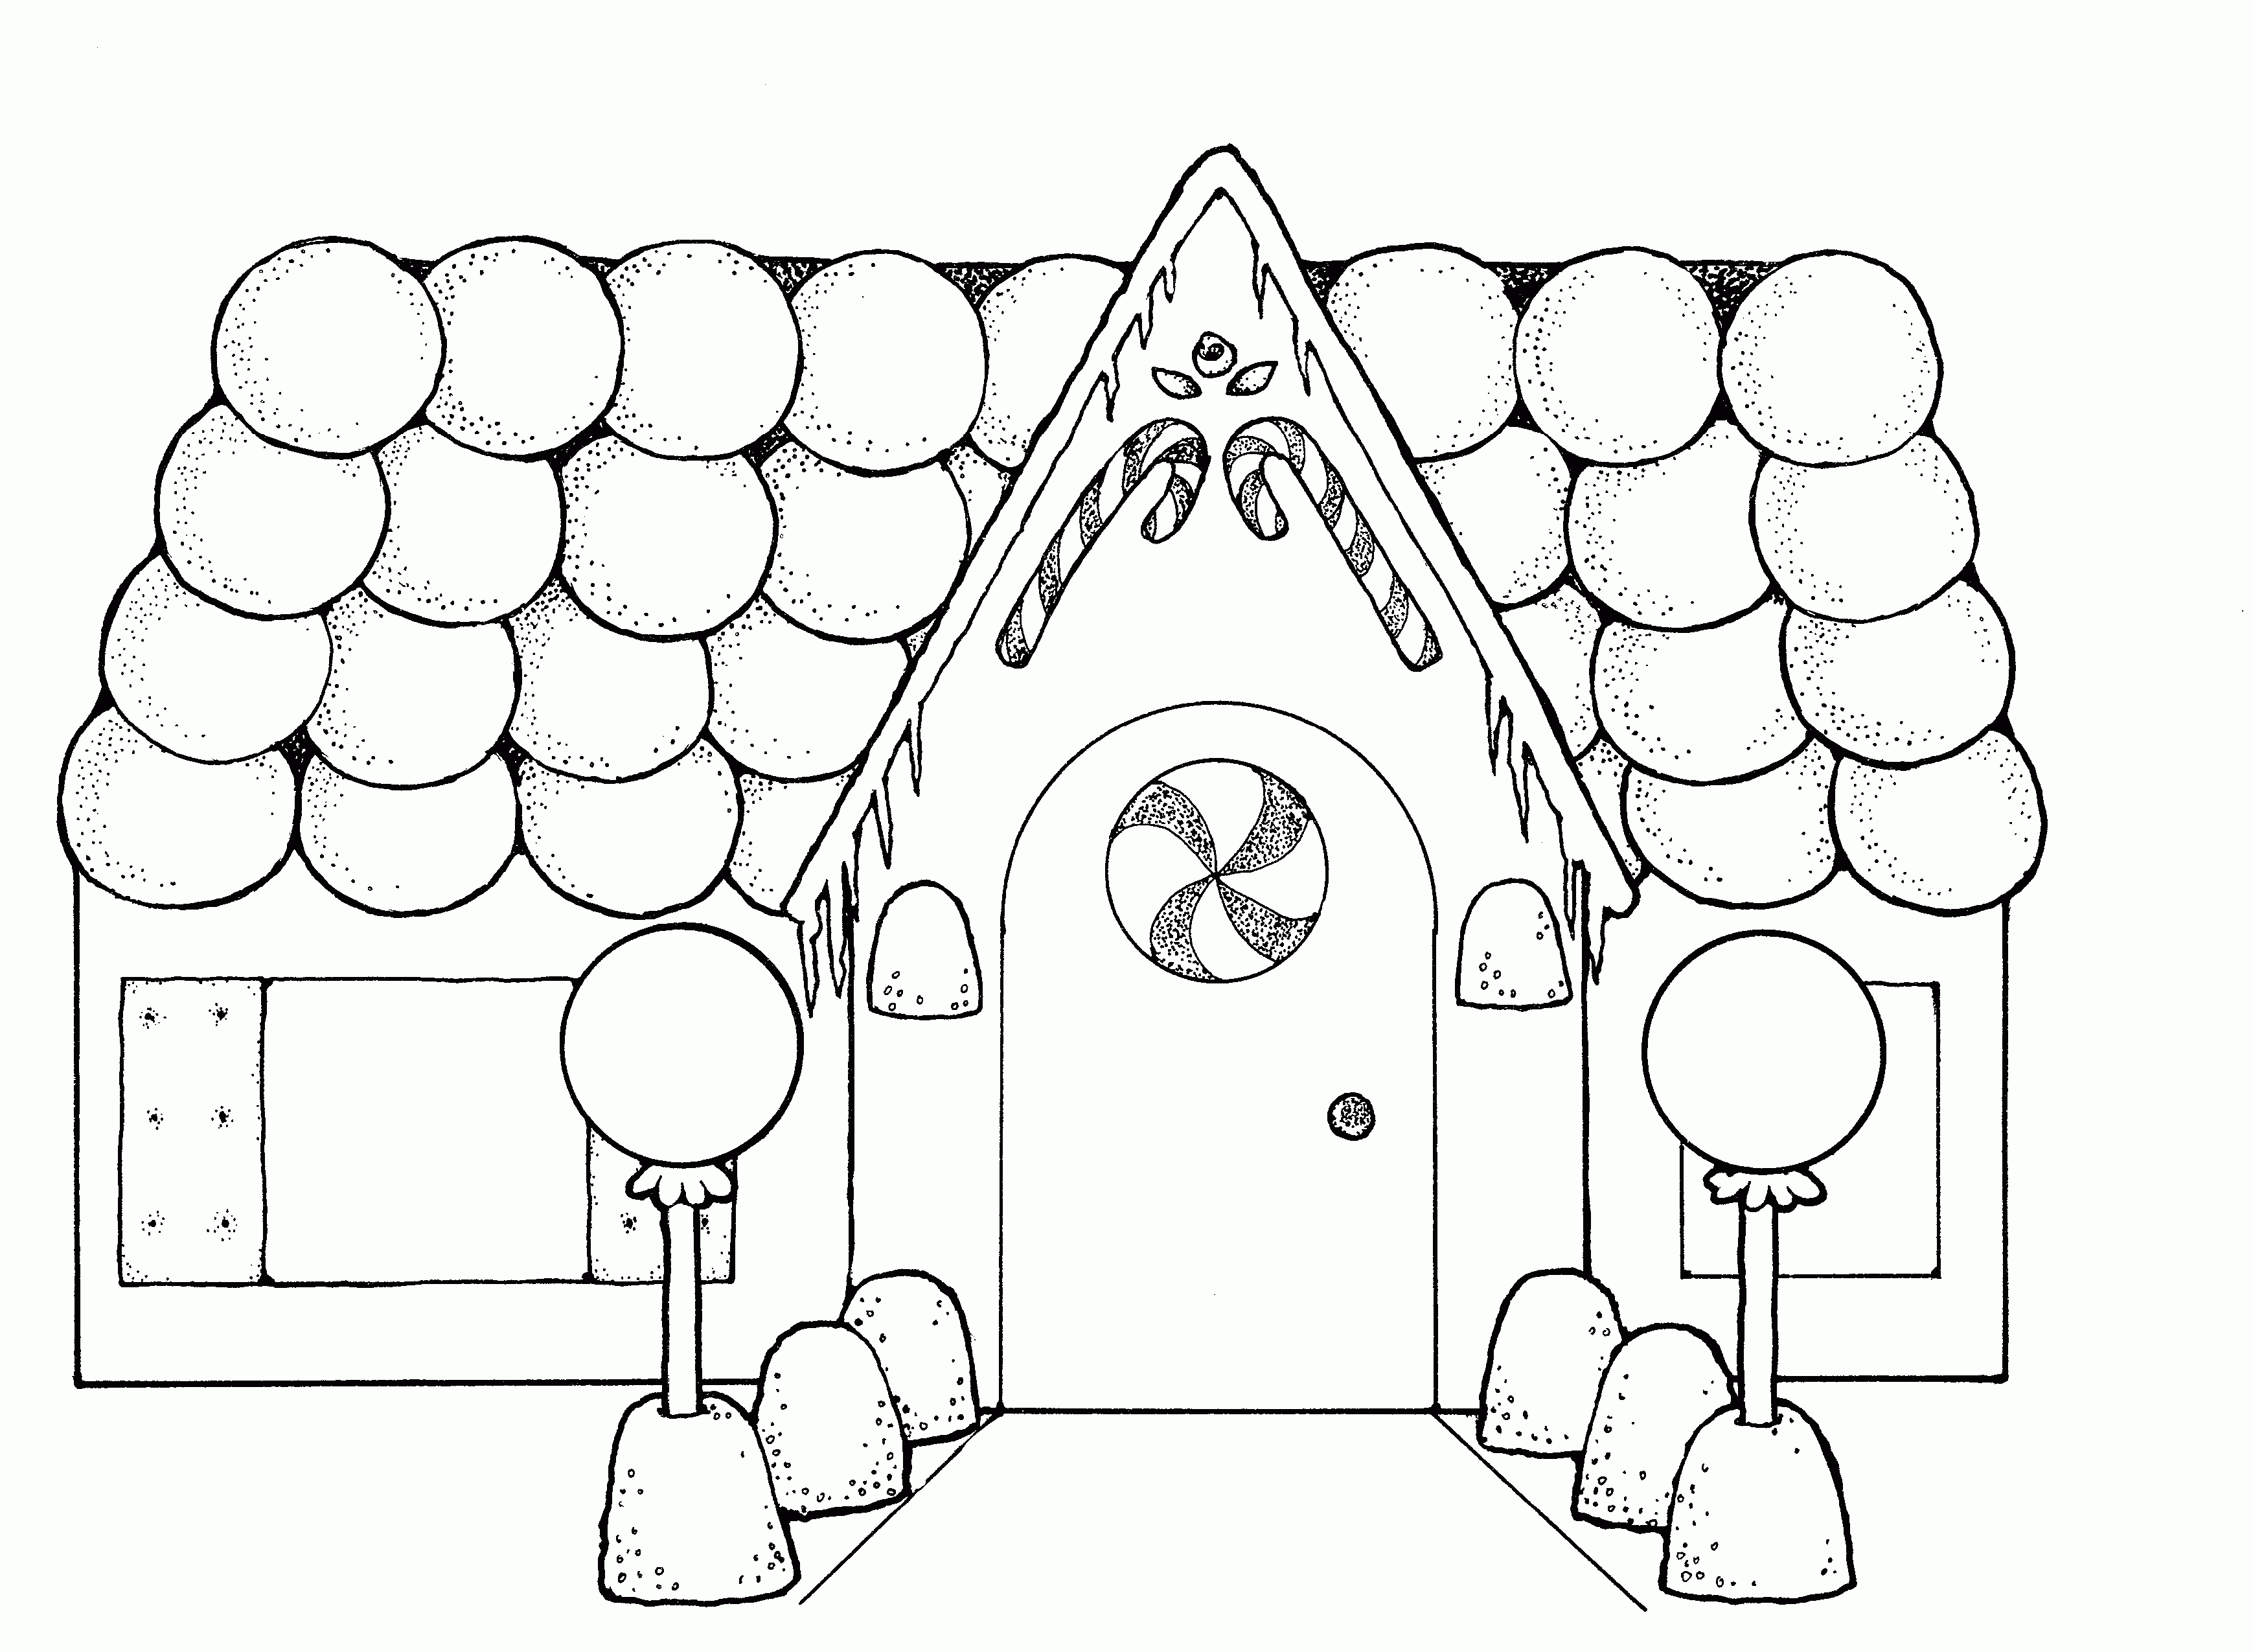 Free Printable Christmas Coloring Page - Coloring Page Photos